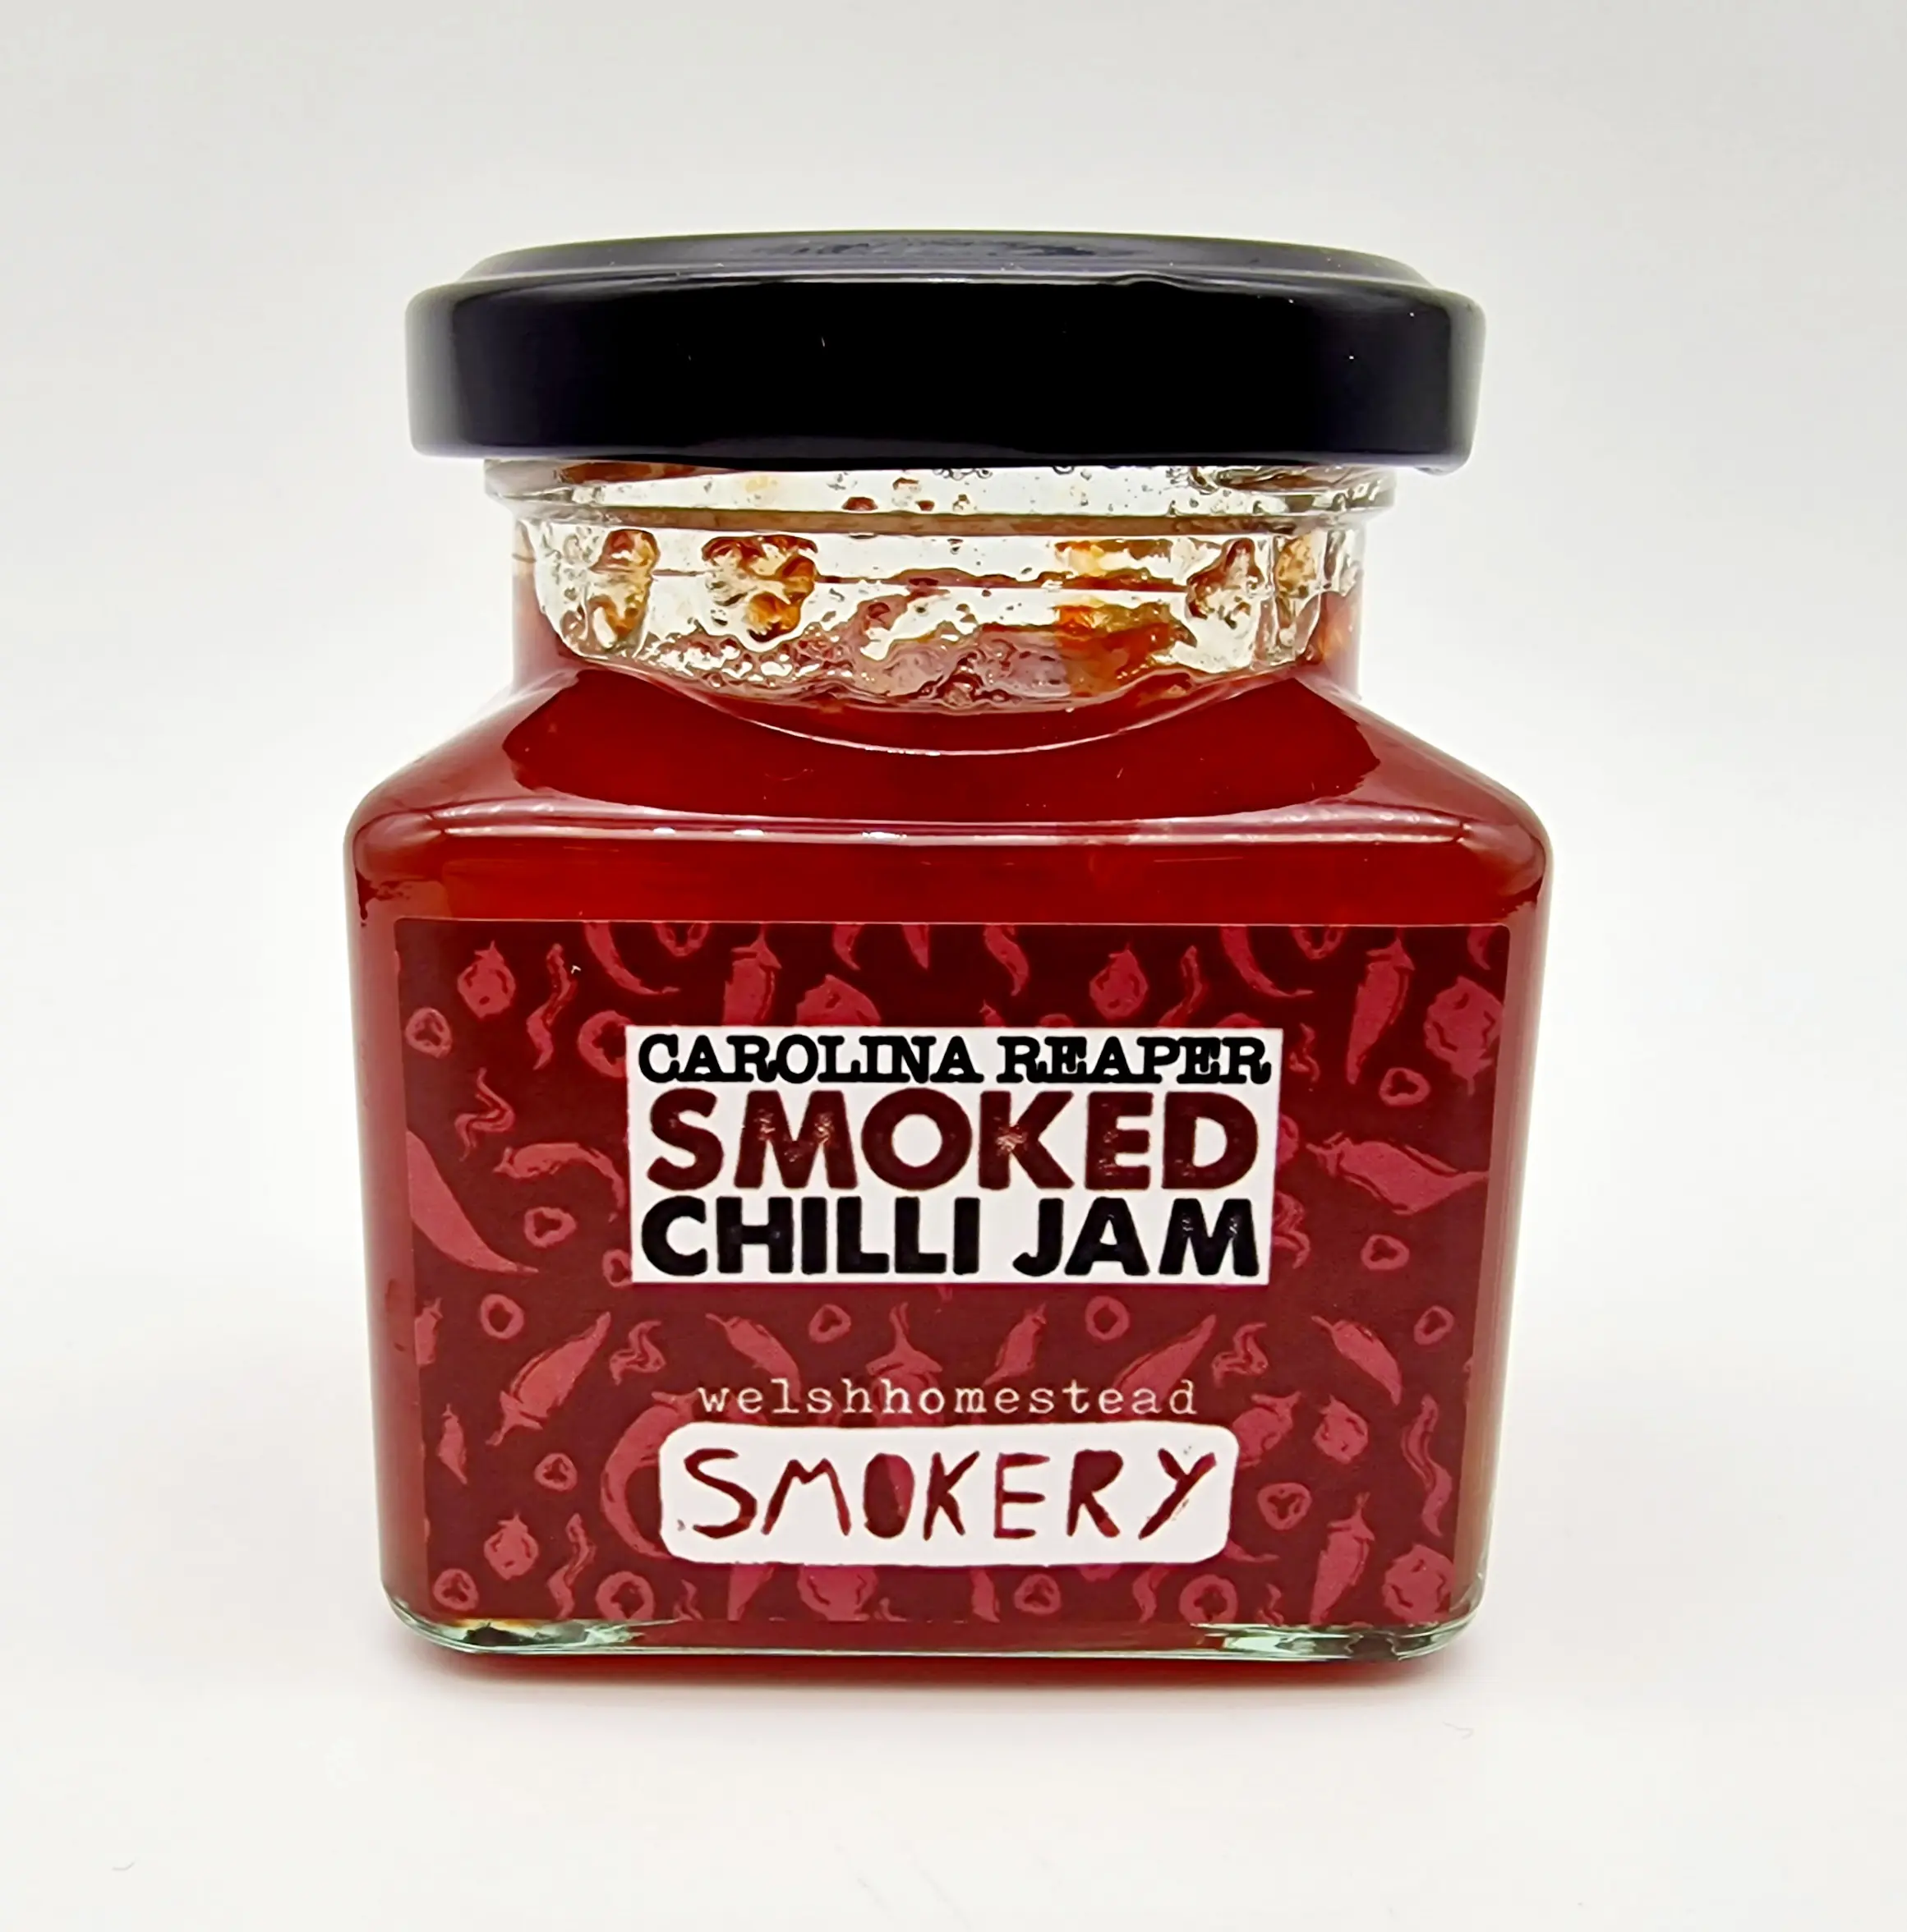 smoked chilli jam - What is the spiciest chilli jam